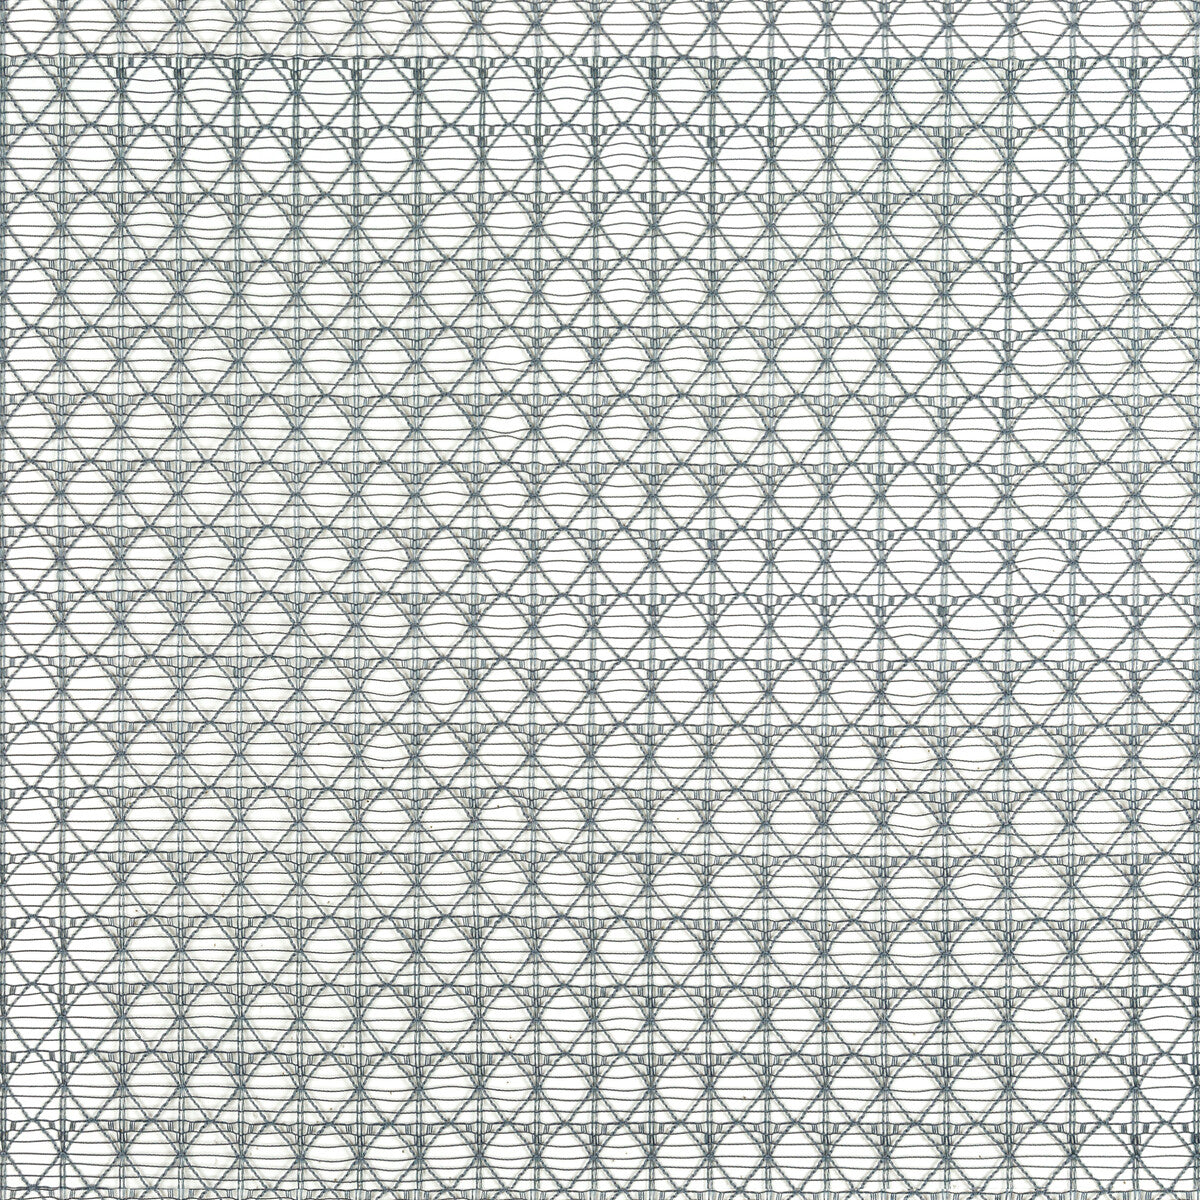 Intersecting fabric in heron color - pattern 4824.35.0 - by Kravet Contract